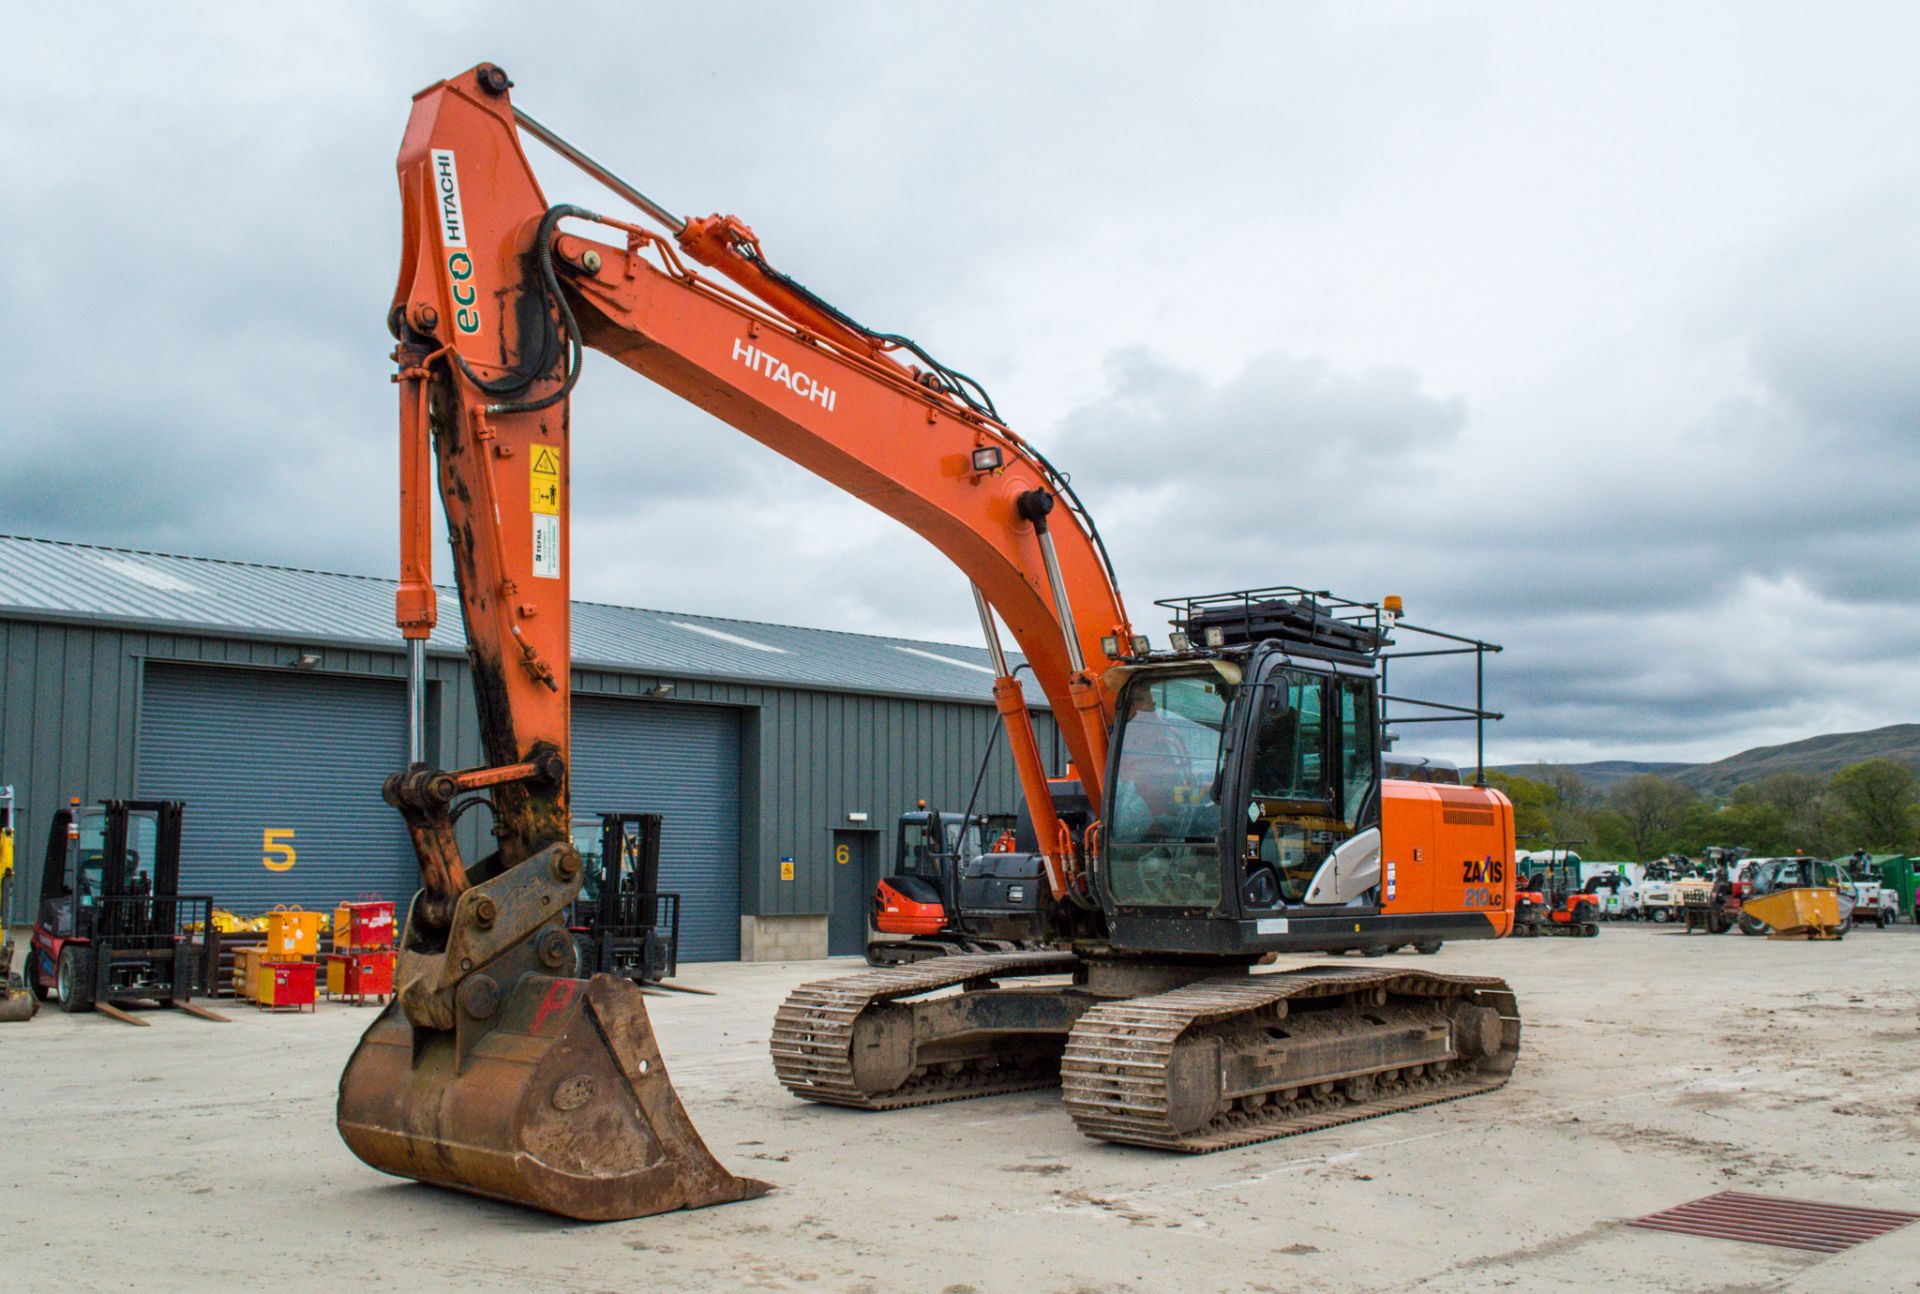 Hitachi ZX 210 LC 21 tonne steel tracked excavator Year: 2015 S/N: 303730 Recorded hours: 5549 Air